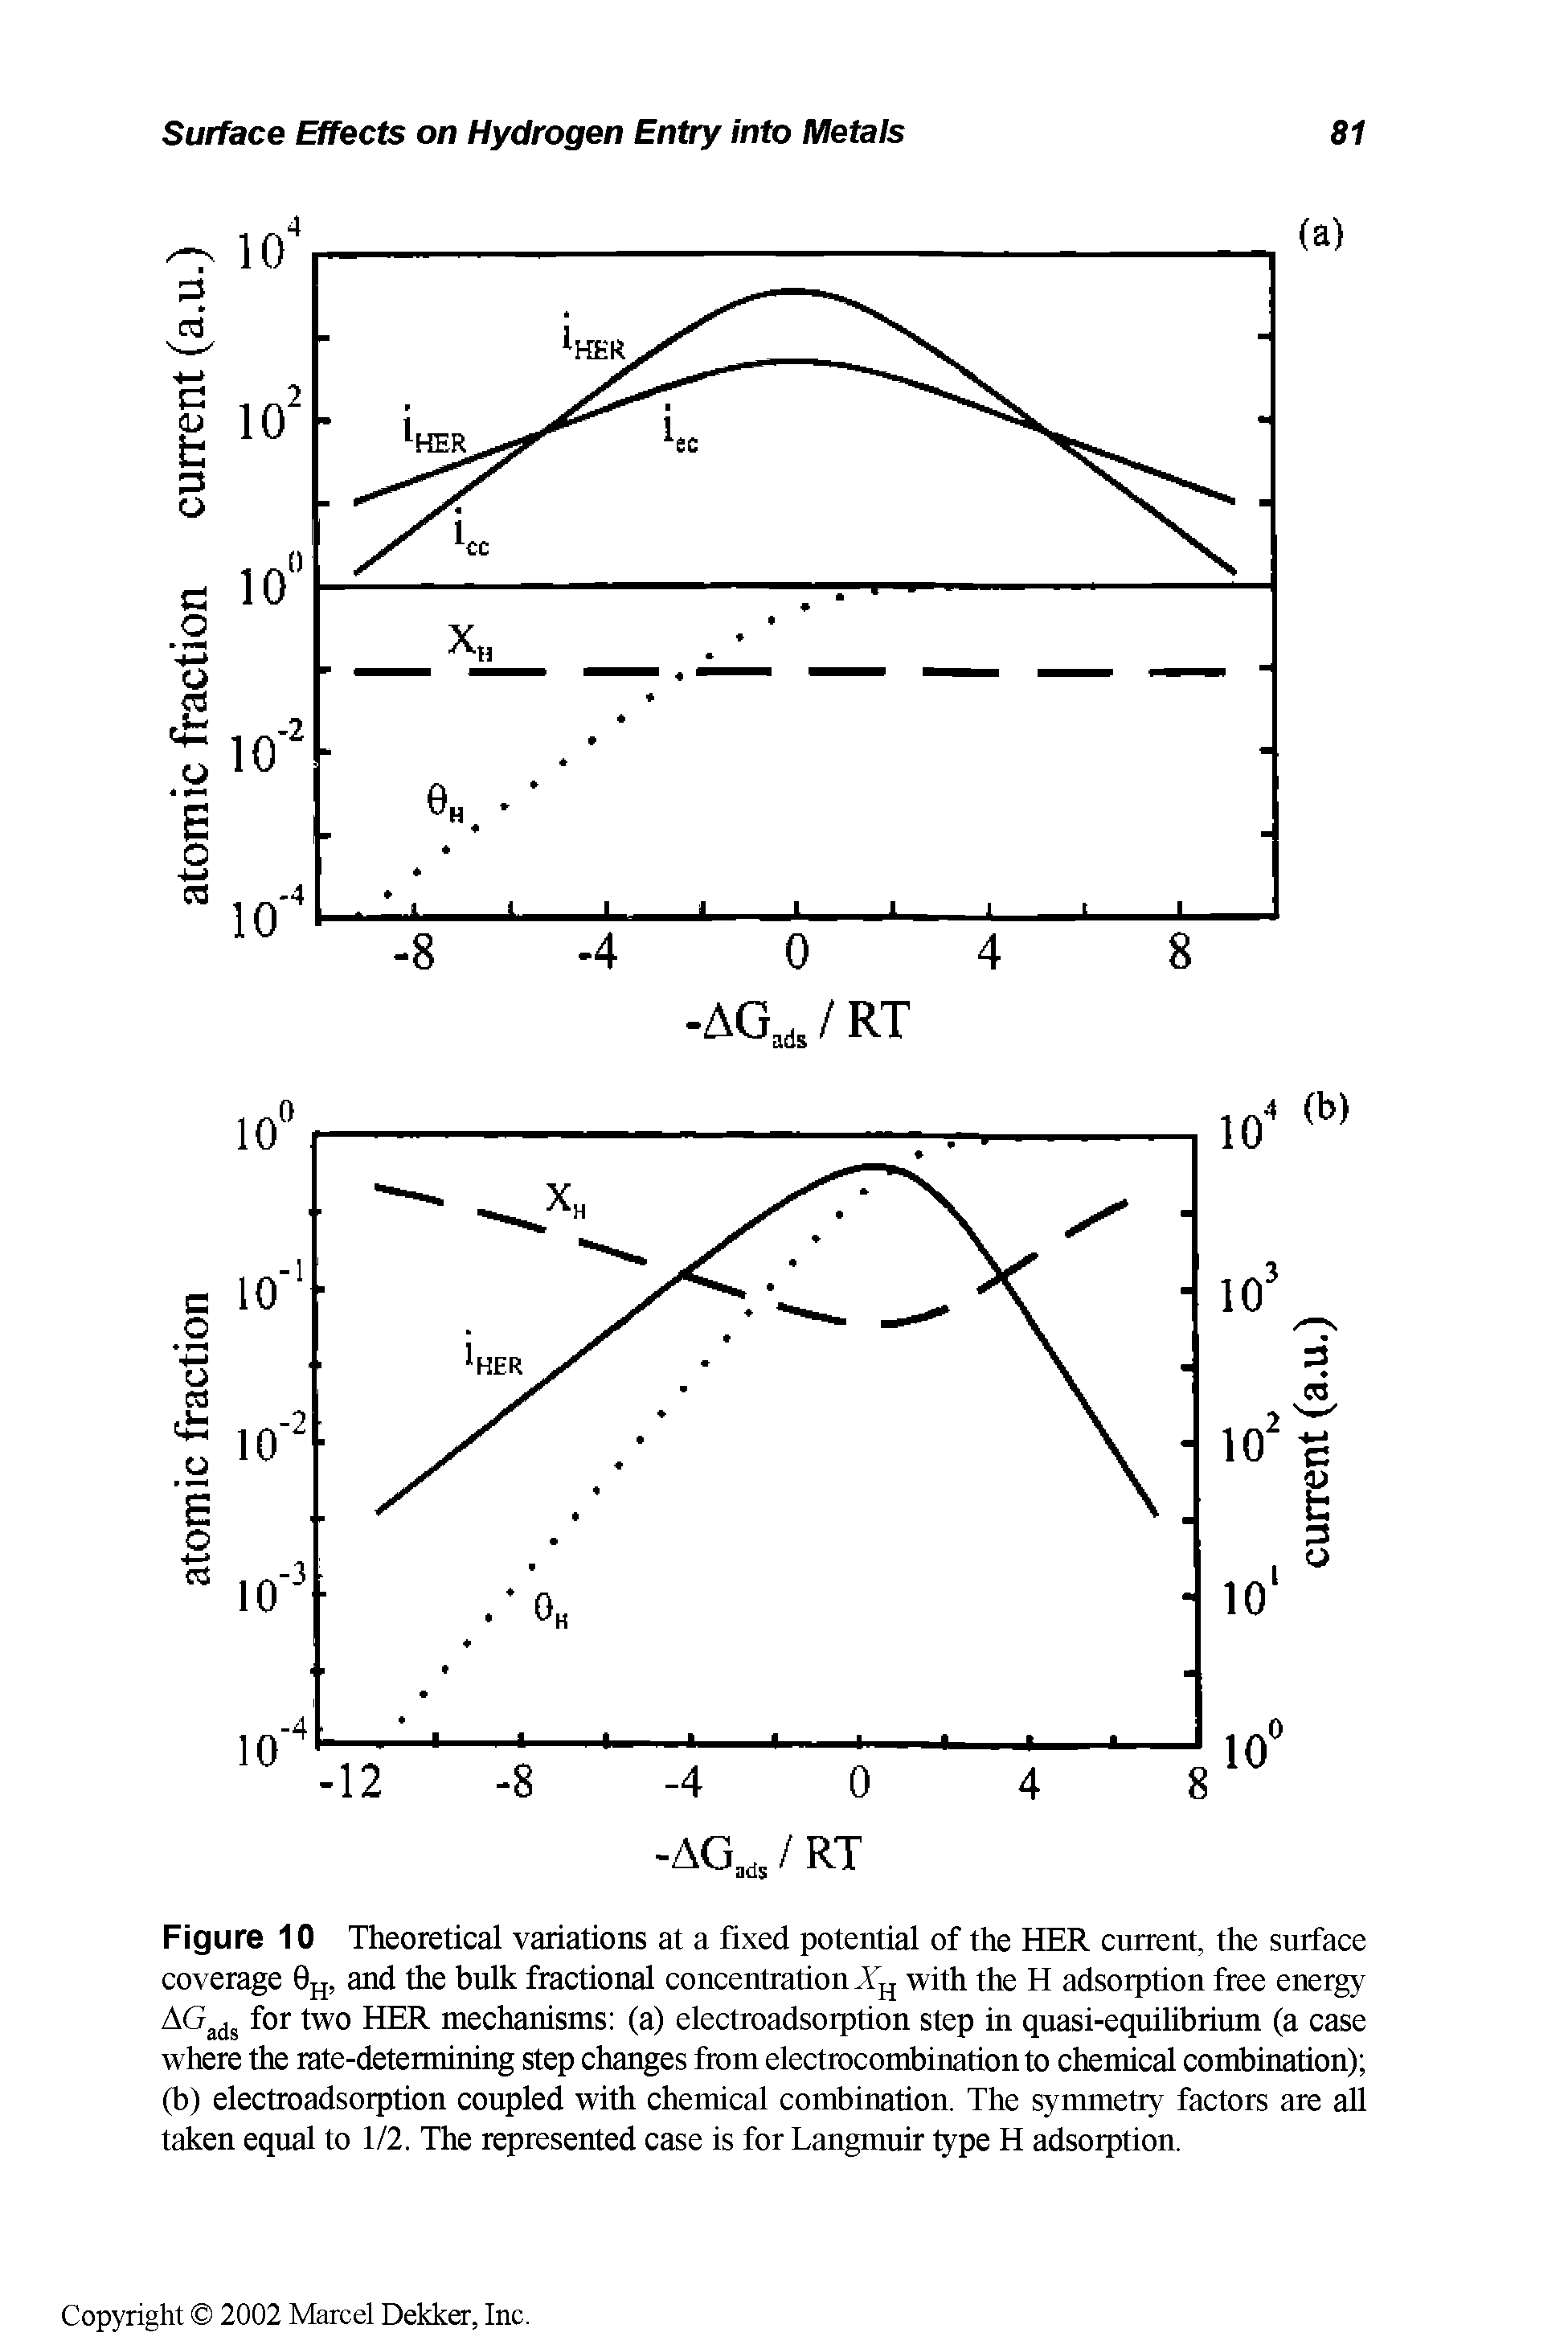 Figure 10 Theoretical variations at a fixed potential of the HER current, the surface coverage 6jj, and the bulk fractional concentration with the H adsorption free energy AGadg for two HER mechanisms (a) electroadsorption step in quasi-equilibrium (a case where the rate-determining step changes from electrocombination to chemical combination) (b) electroadsorption coupled with chemical combination. The symmetry factors are all taken equal to 1/2. The represented case is for Langmuir type H adsorption.